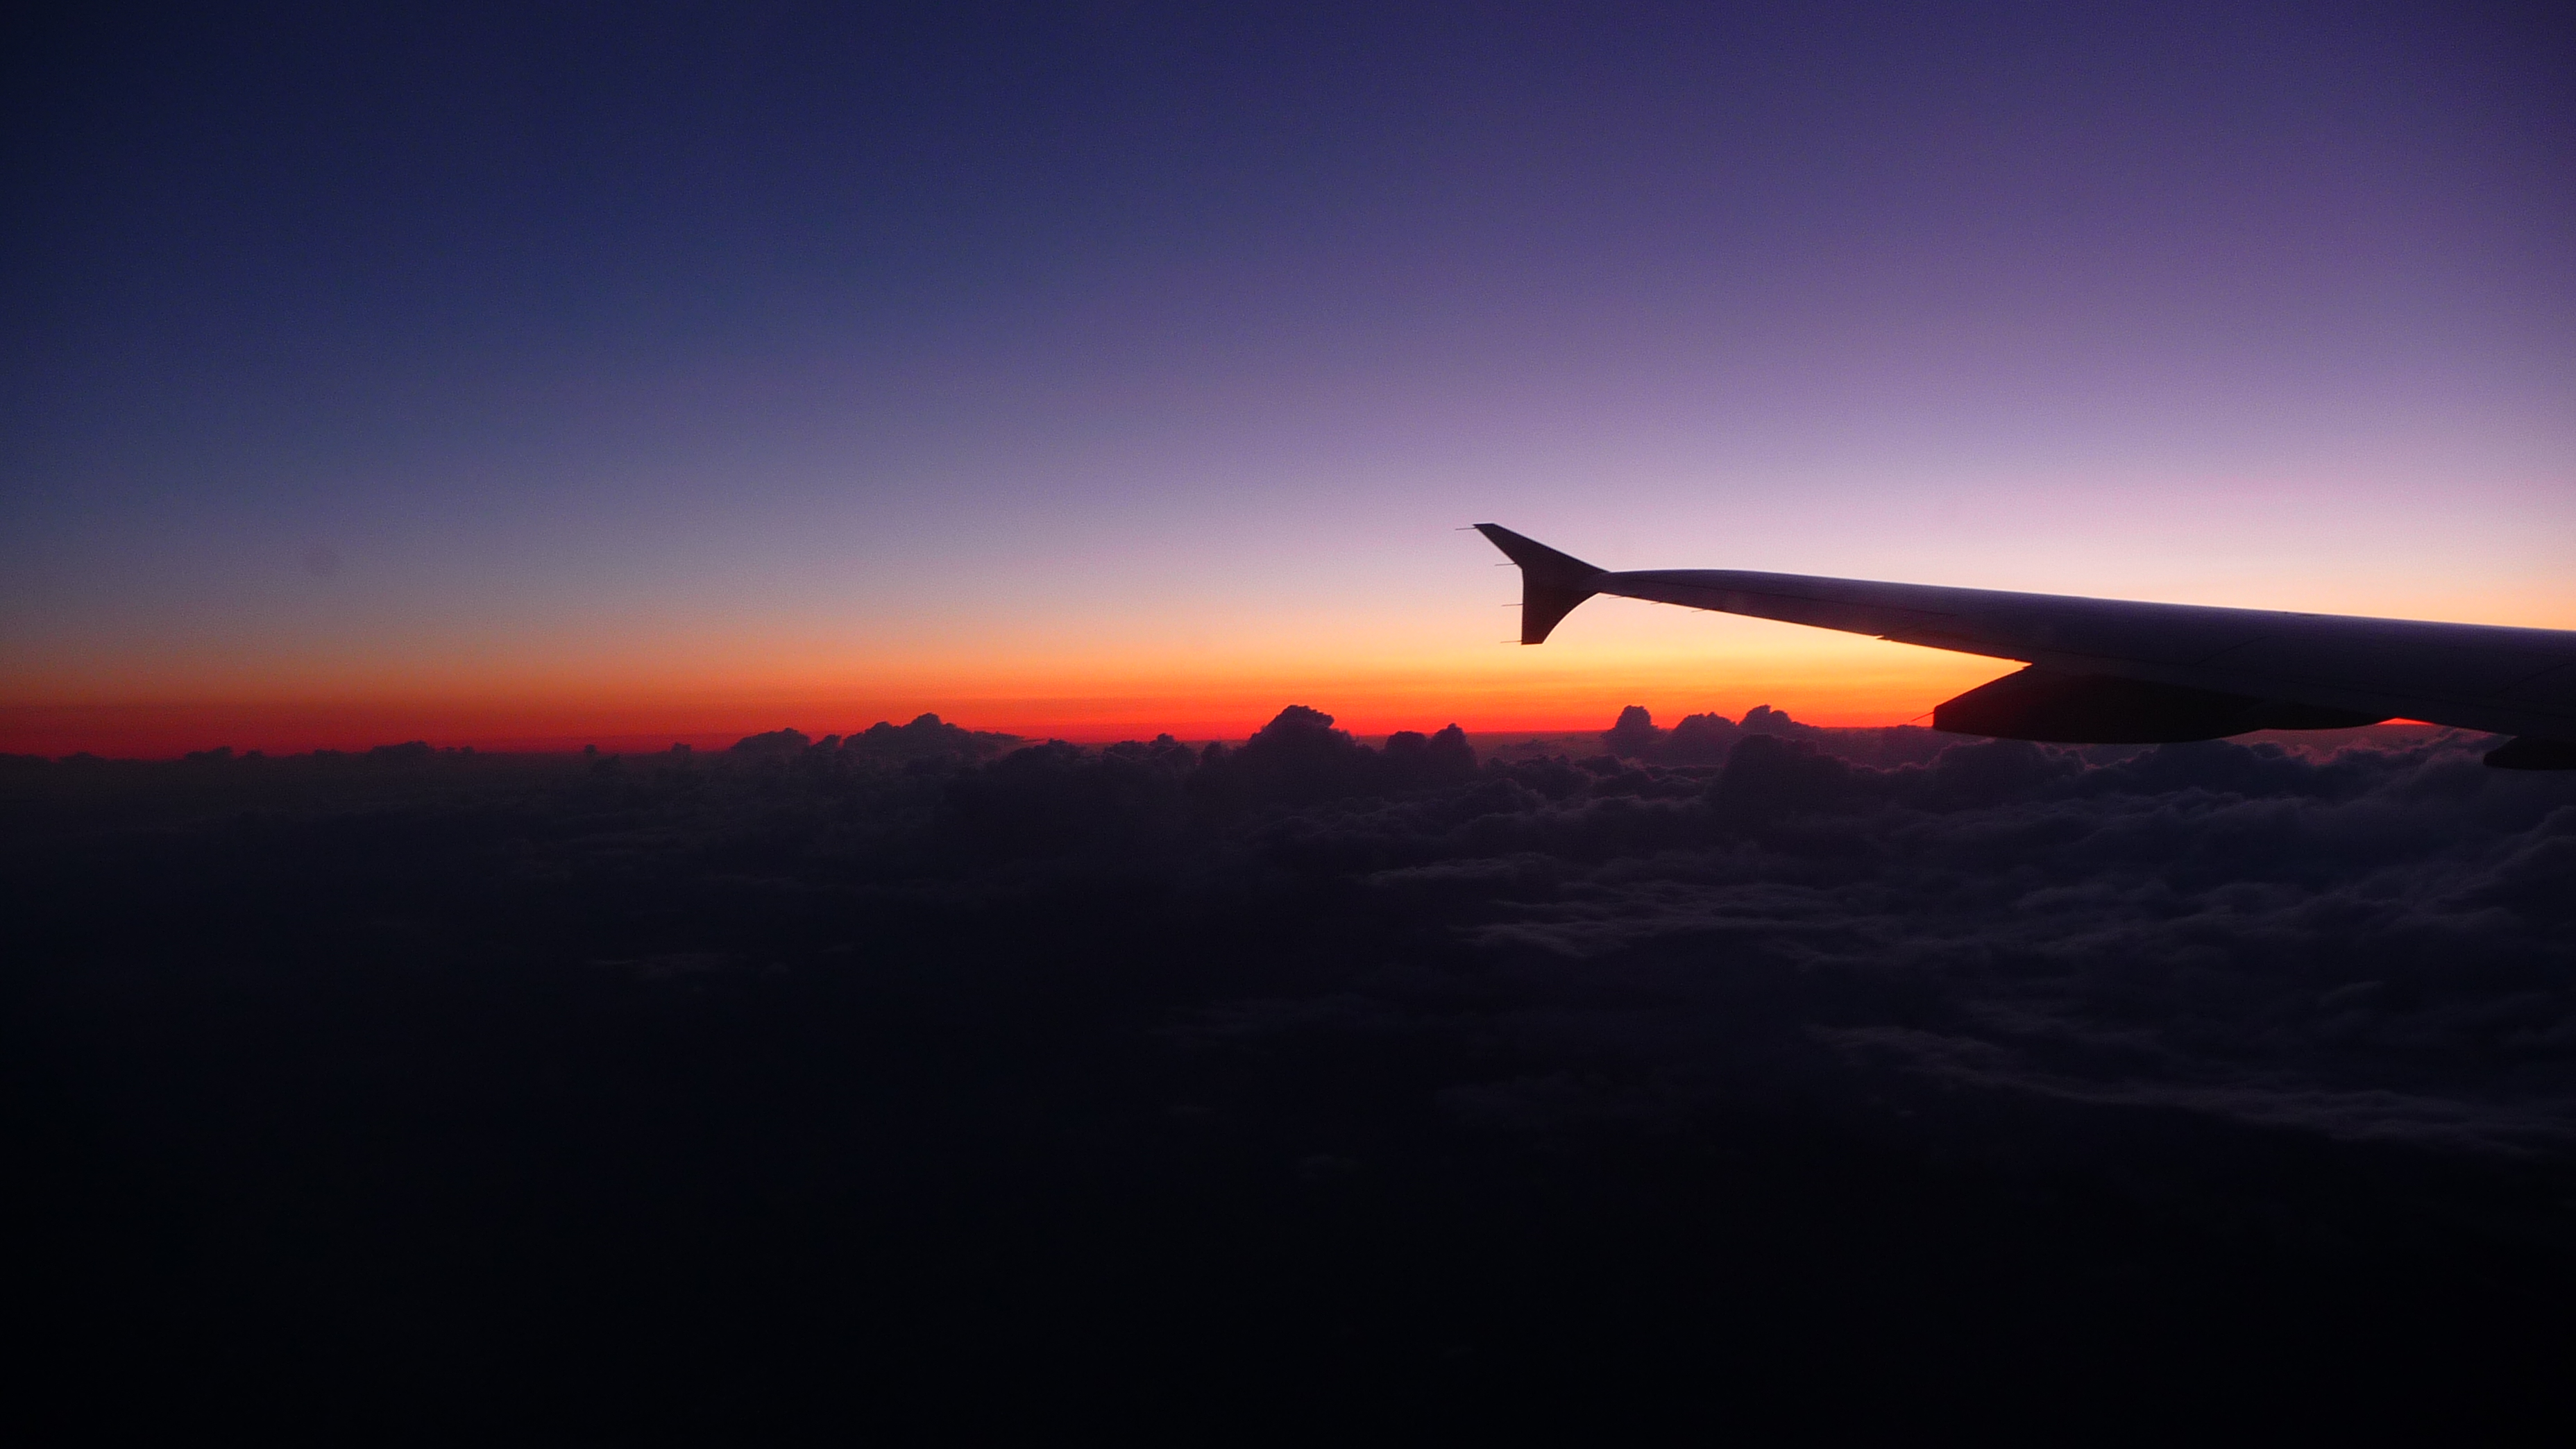 File:Sunset in a plane.JPG - Wikimedia Commons